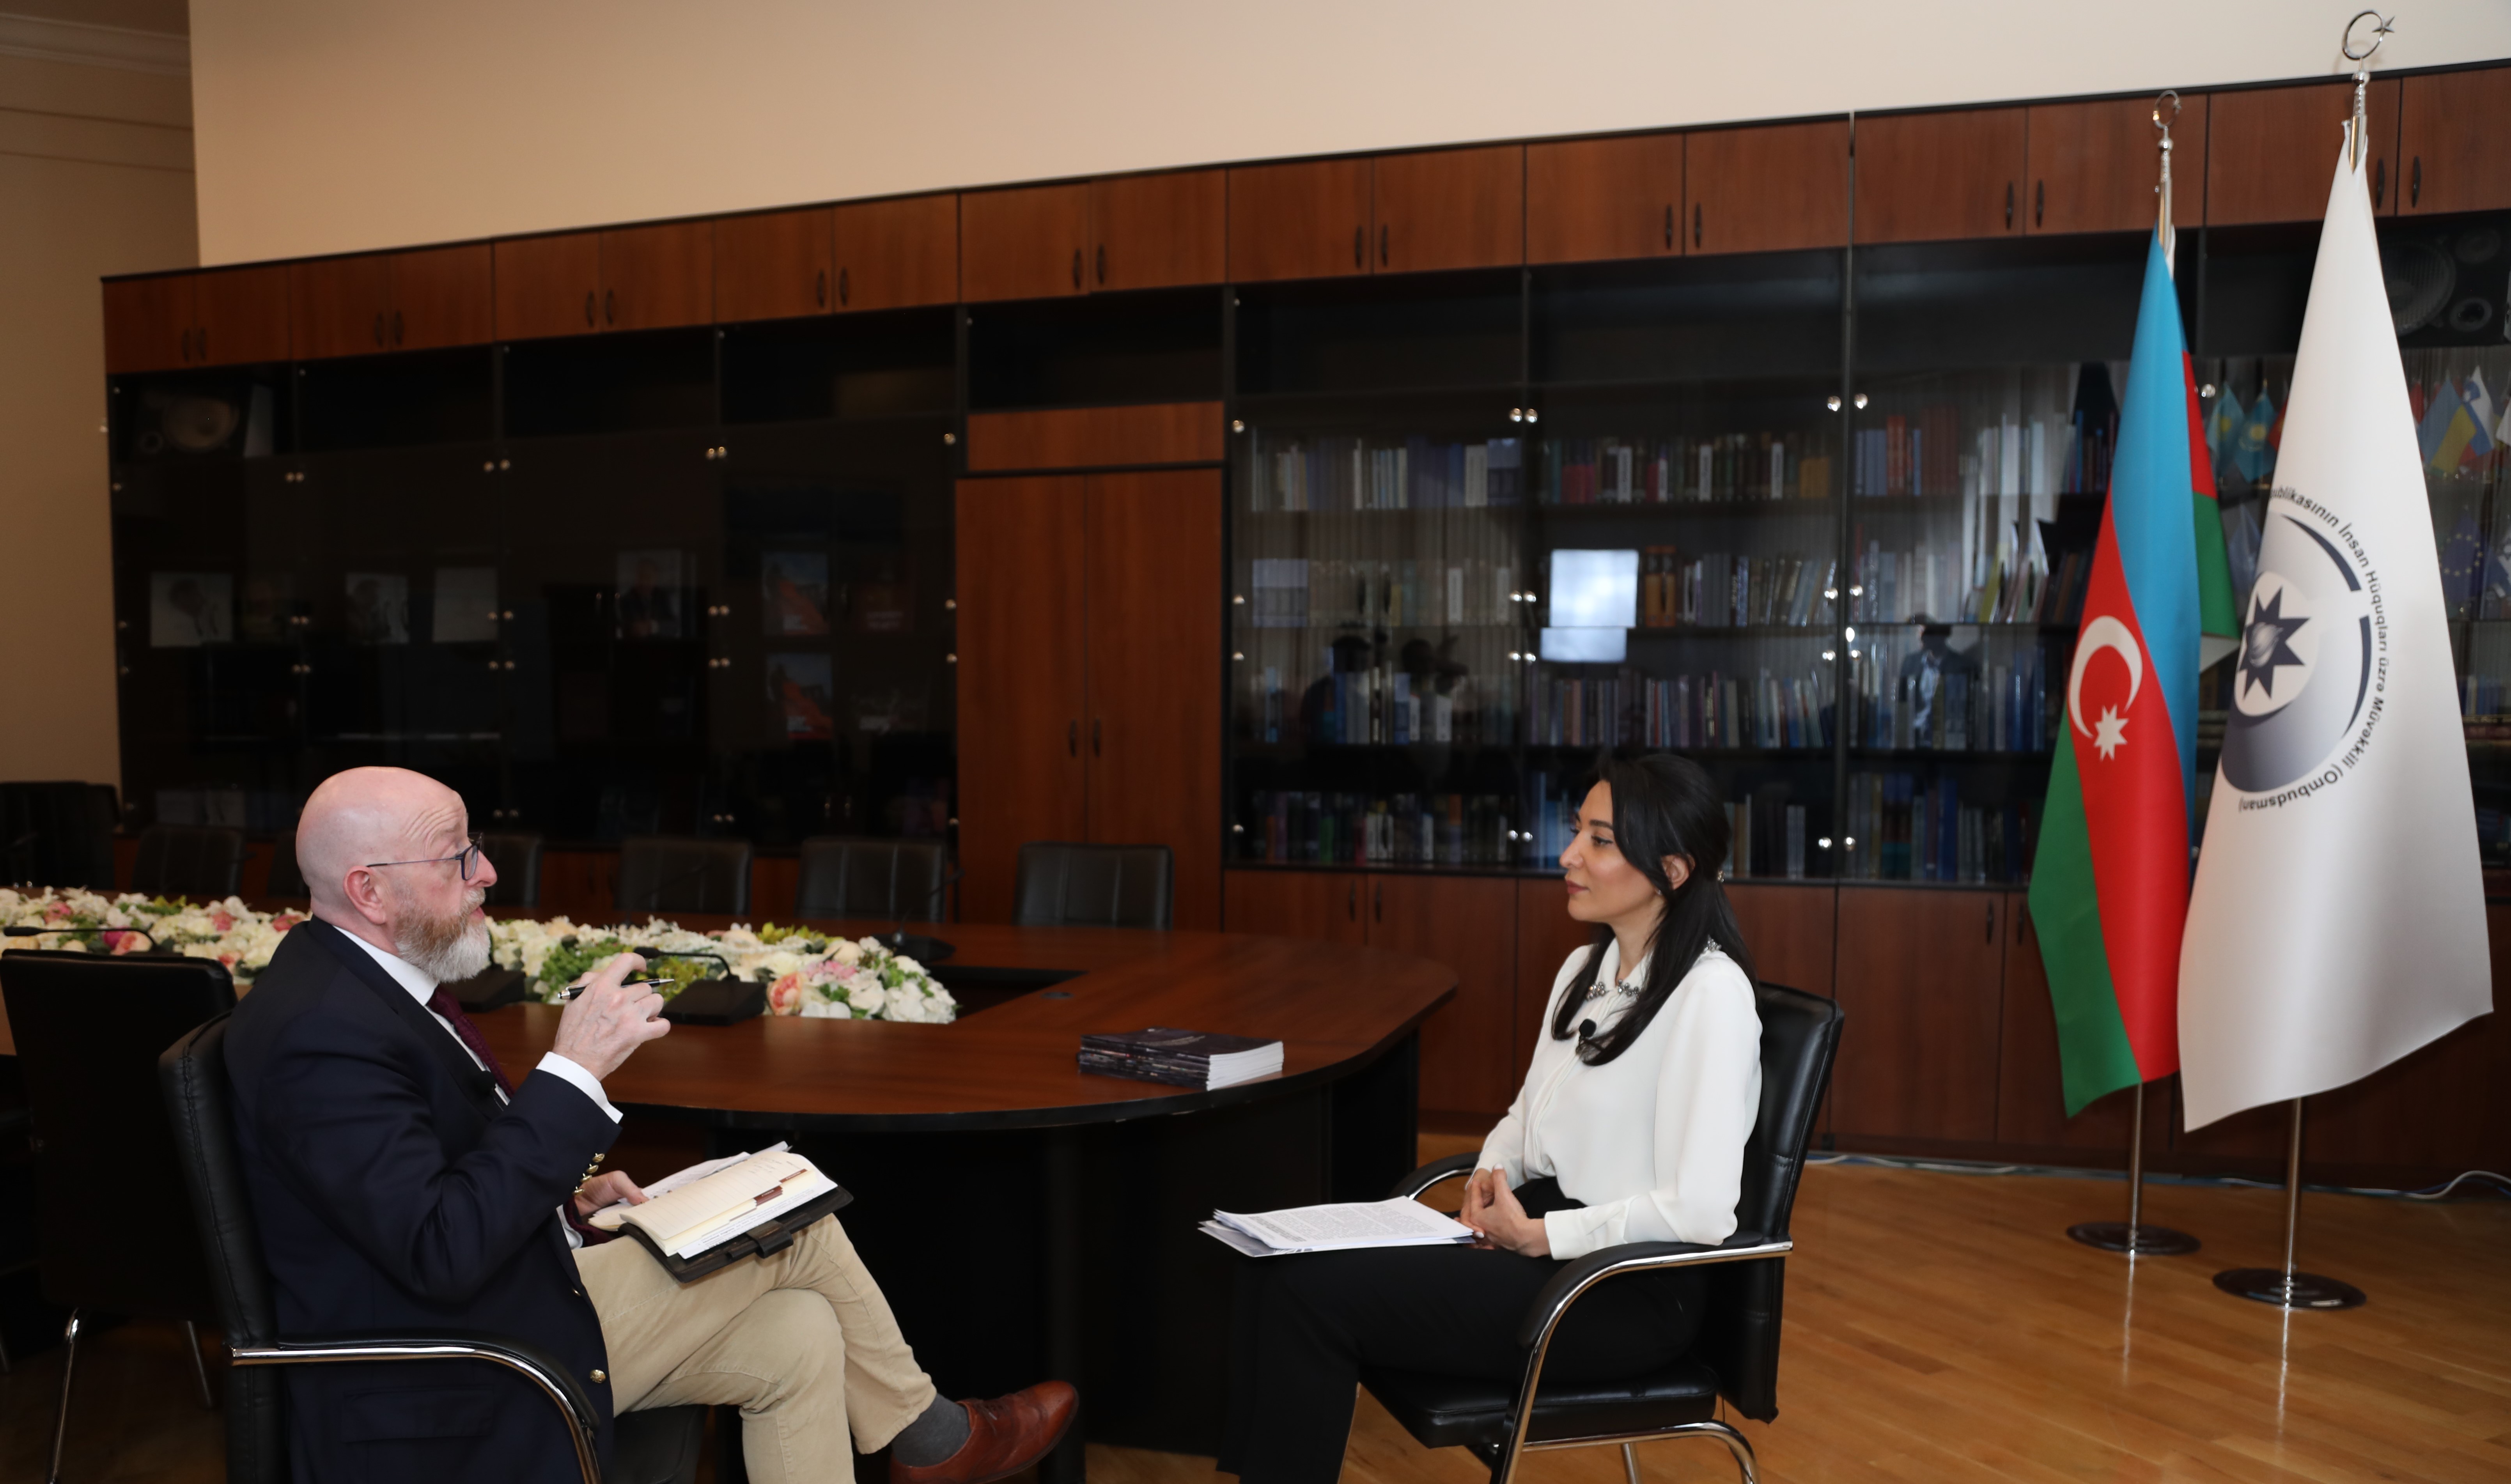 The Ombudsman gave an interview for the book “Revival of Karabakh: from Tragedy to Triumph”